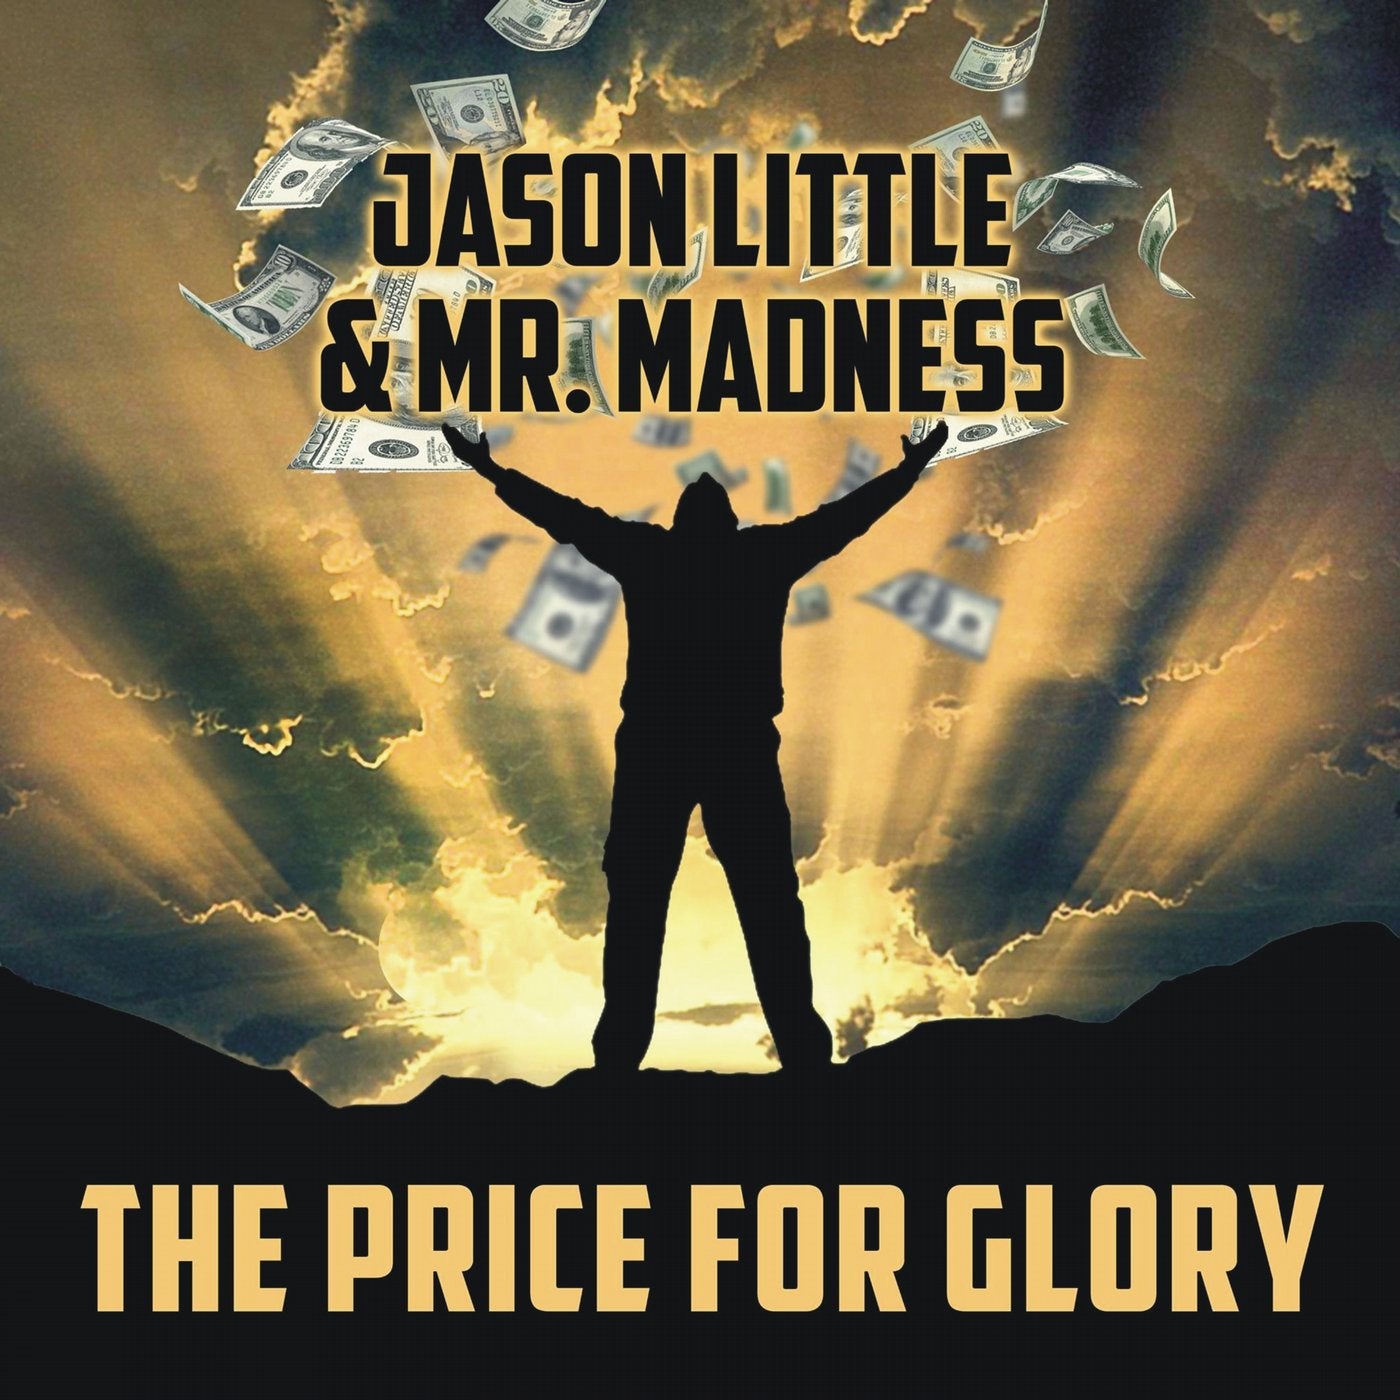 The Price for Glory